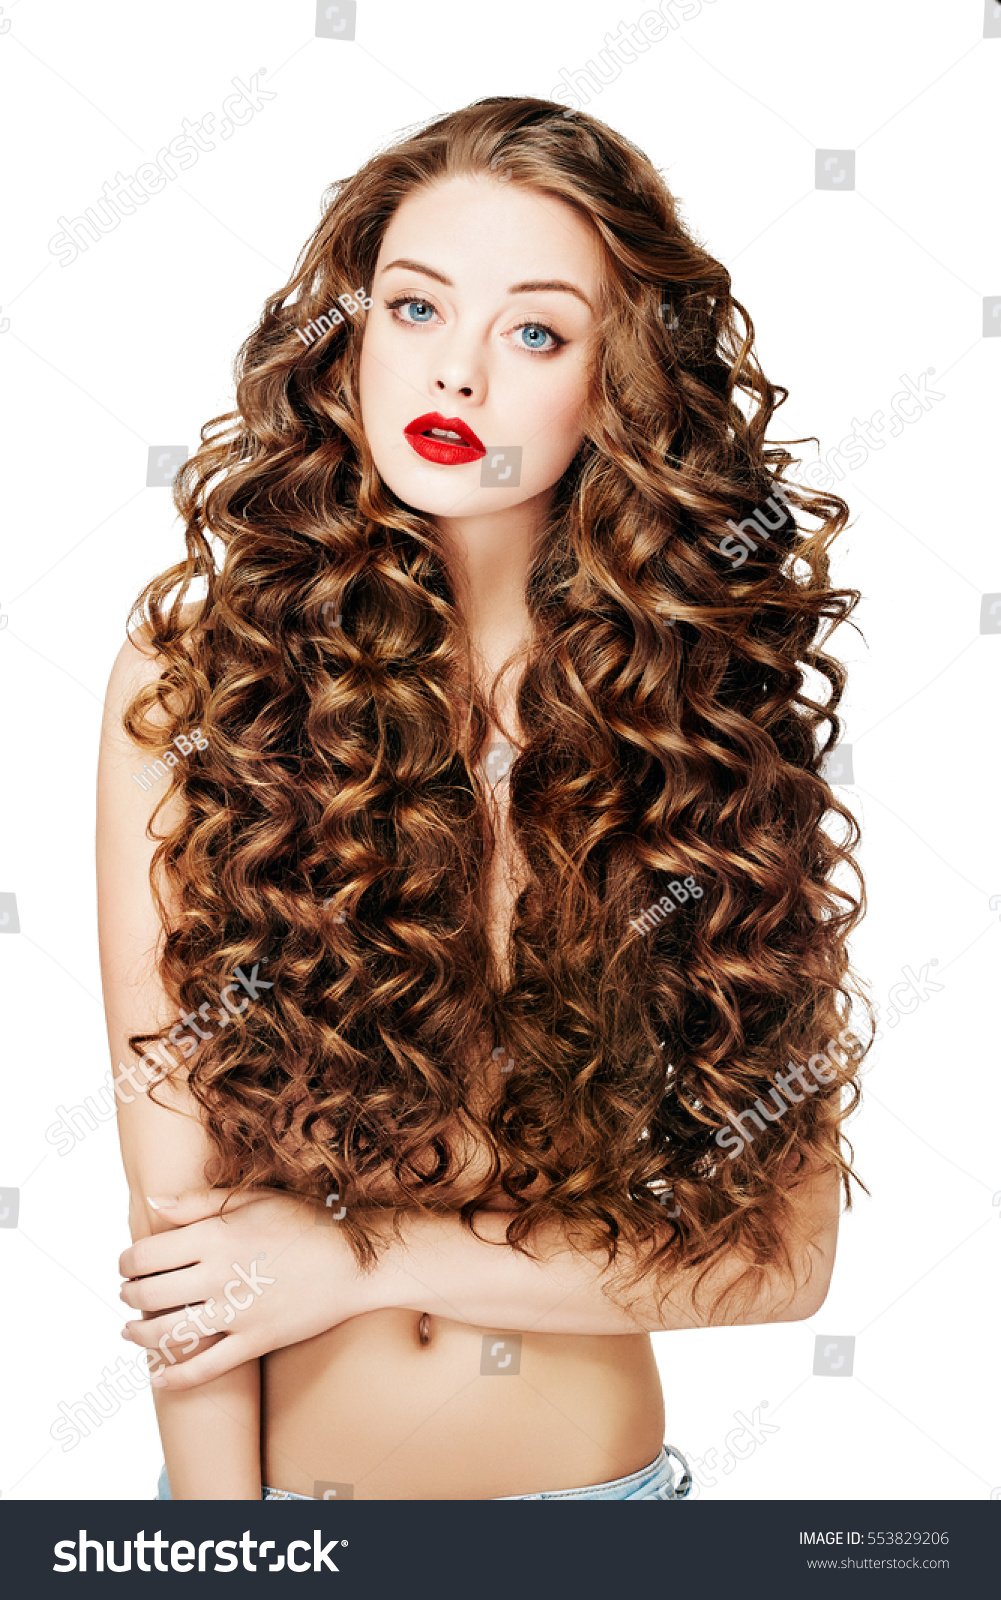 Beautiful People Curly Hair Fashion Girl Stock Photo Edit Now